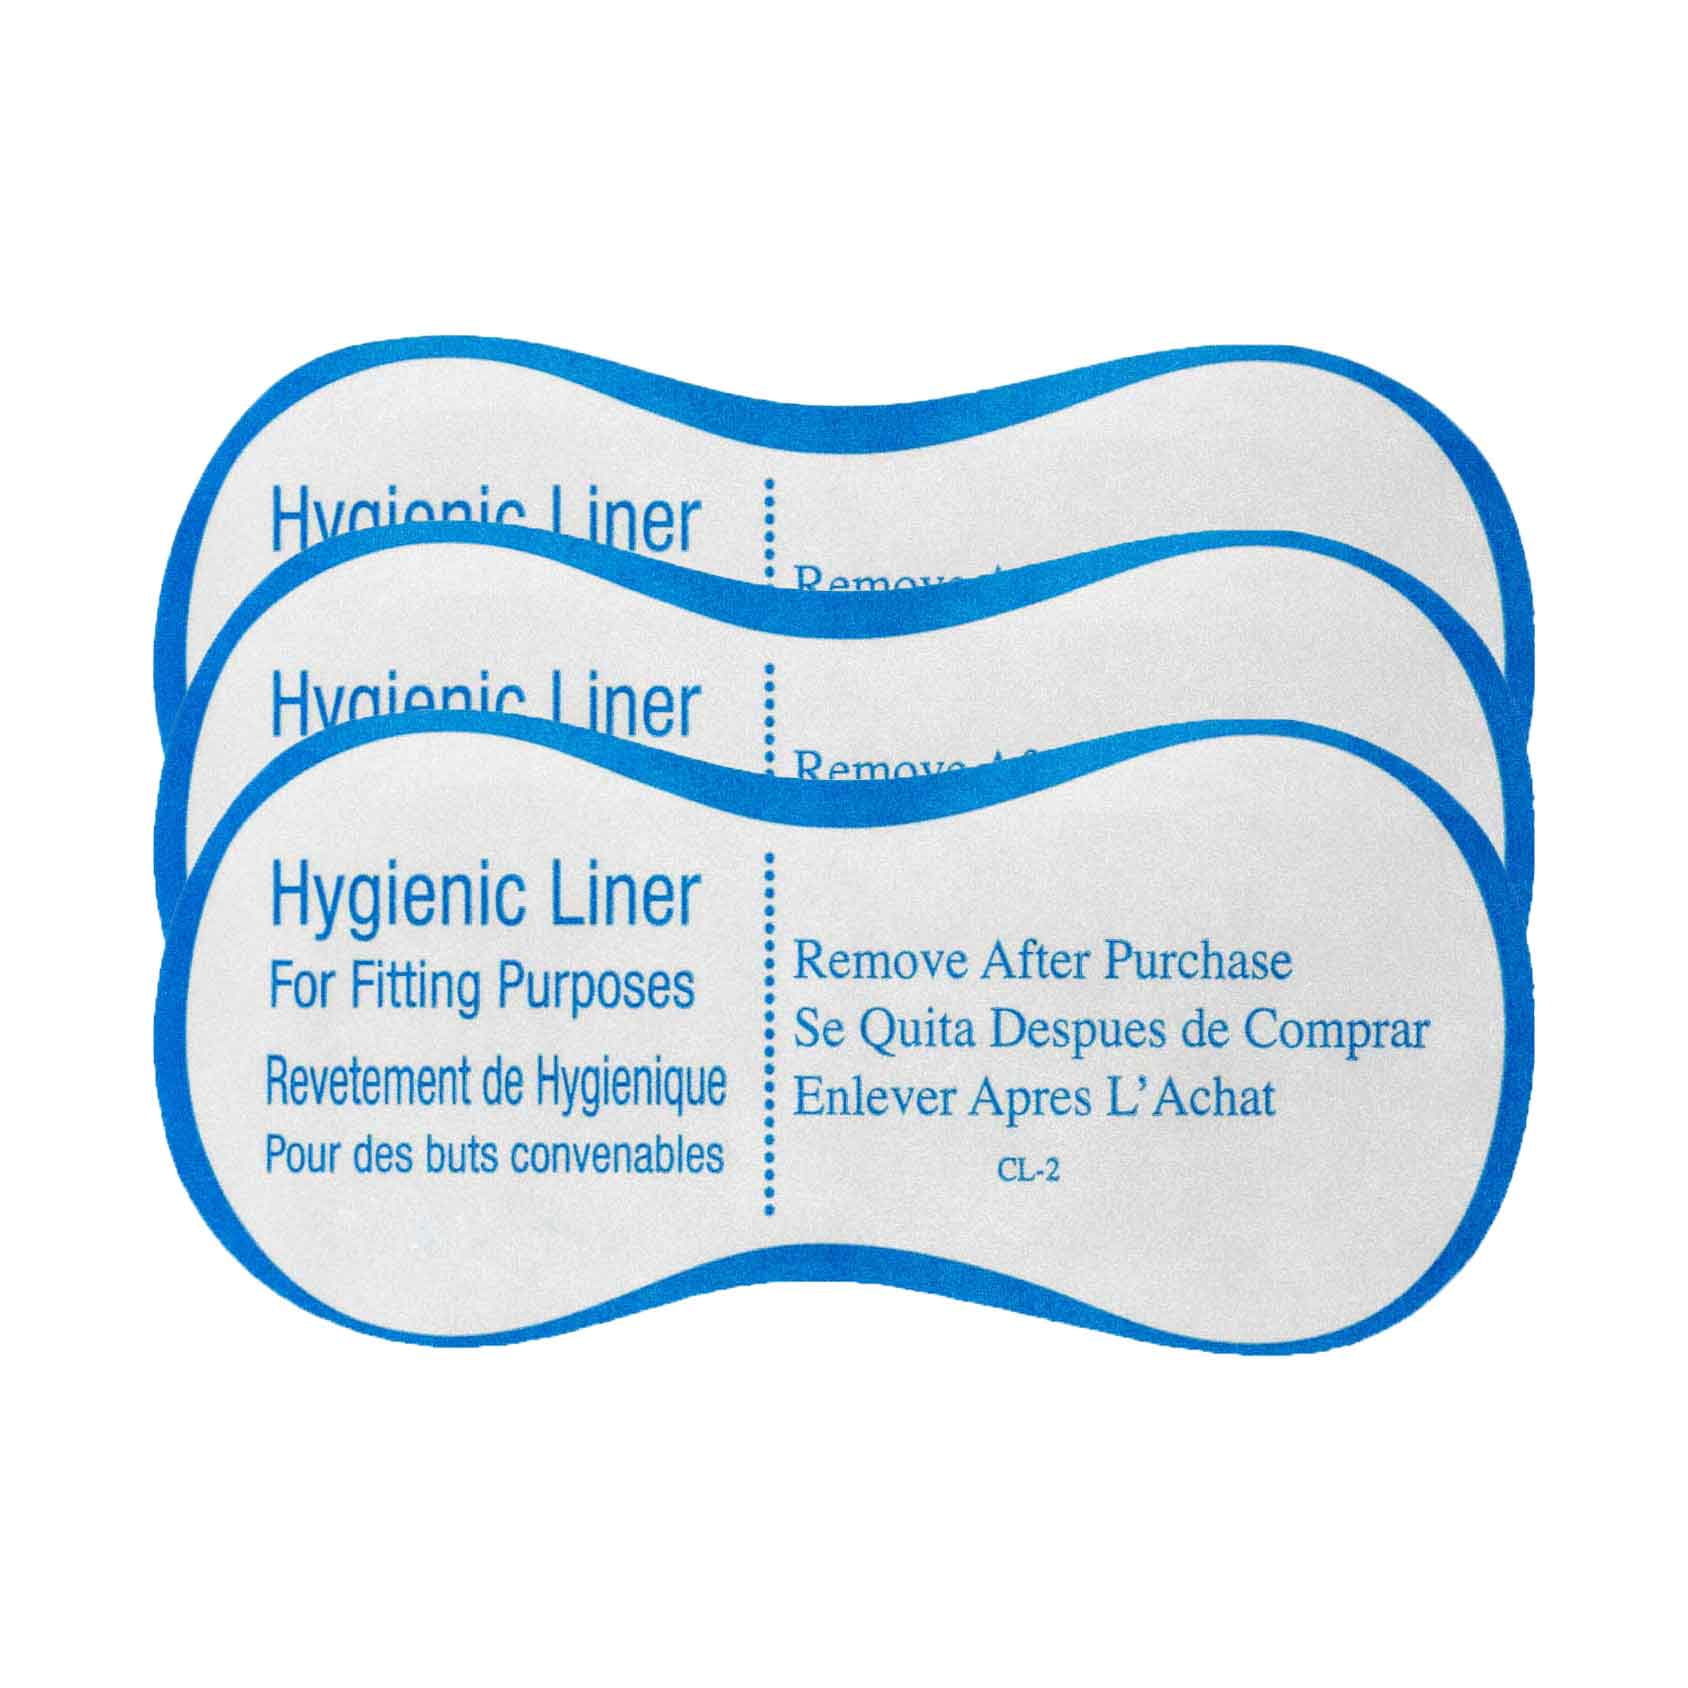 Liners for Swimwear & Lingerie Adhesive Protective Hygiene Try On Stickers 